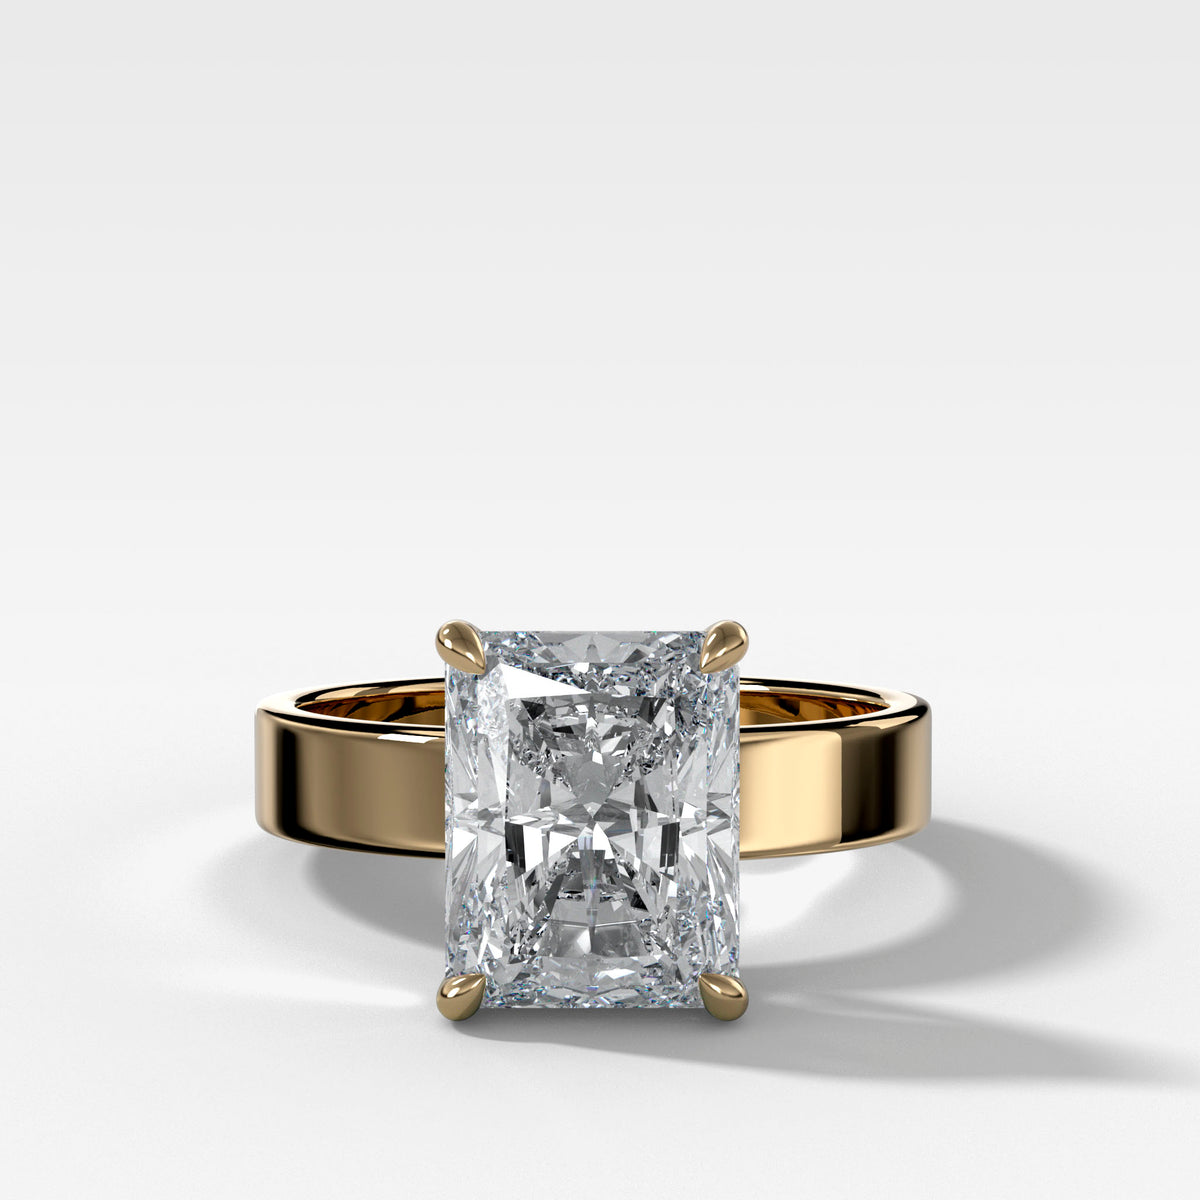 Finest Solitaire Engagement Ring With Elongated Radiant Cut Diamond